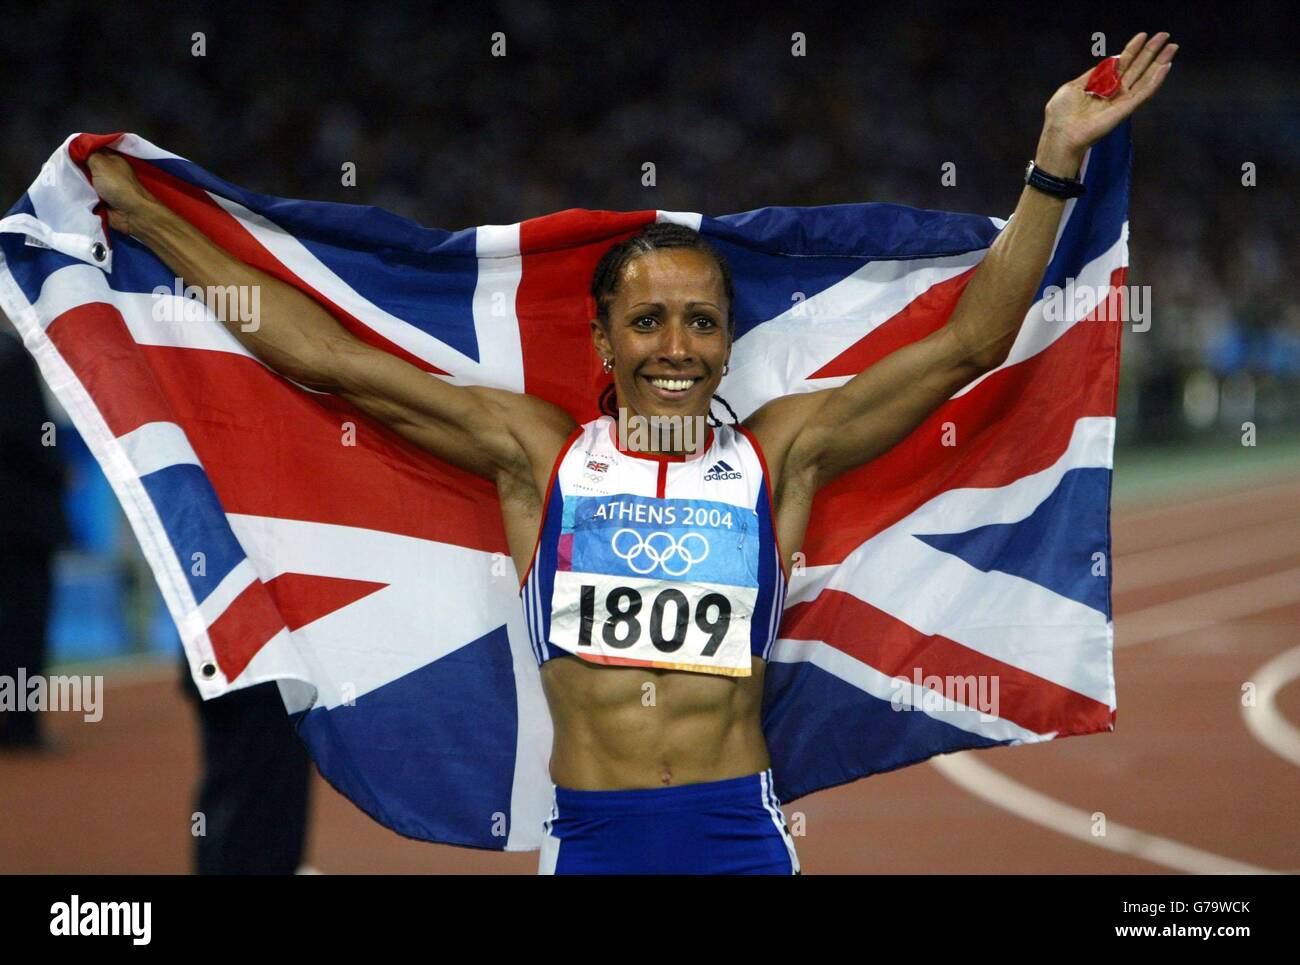 Great Britain's gold medal winner Kelly Holmes celebrates winning the 800m at the Olympic Stadium during the Olympic Games in Athens, Greece. Stock Photo